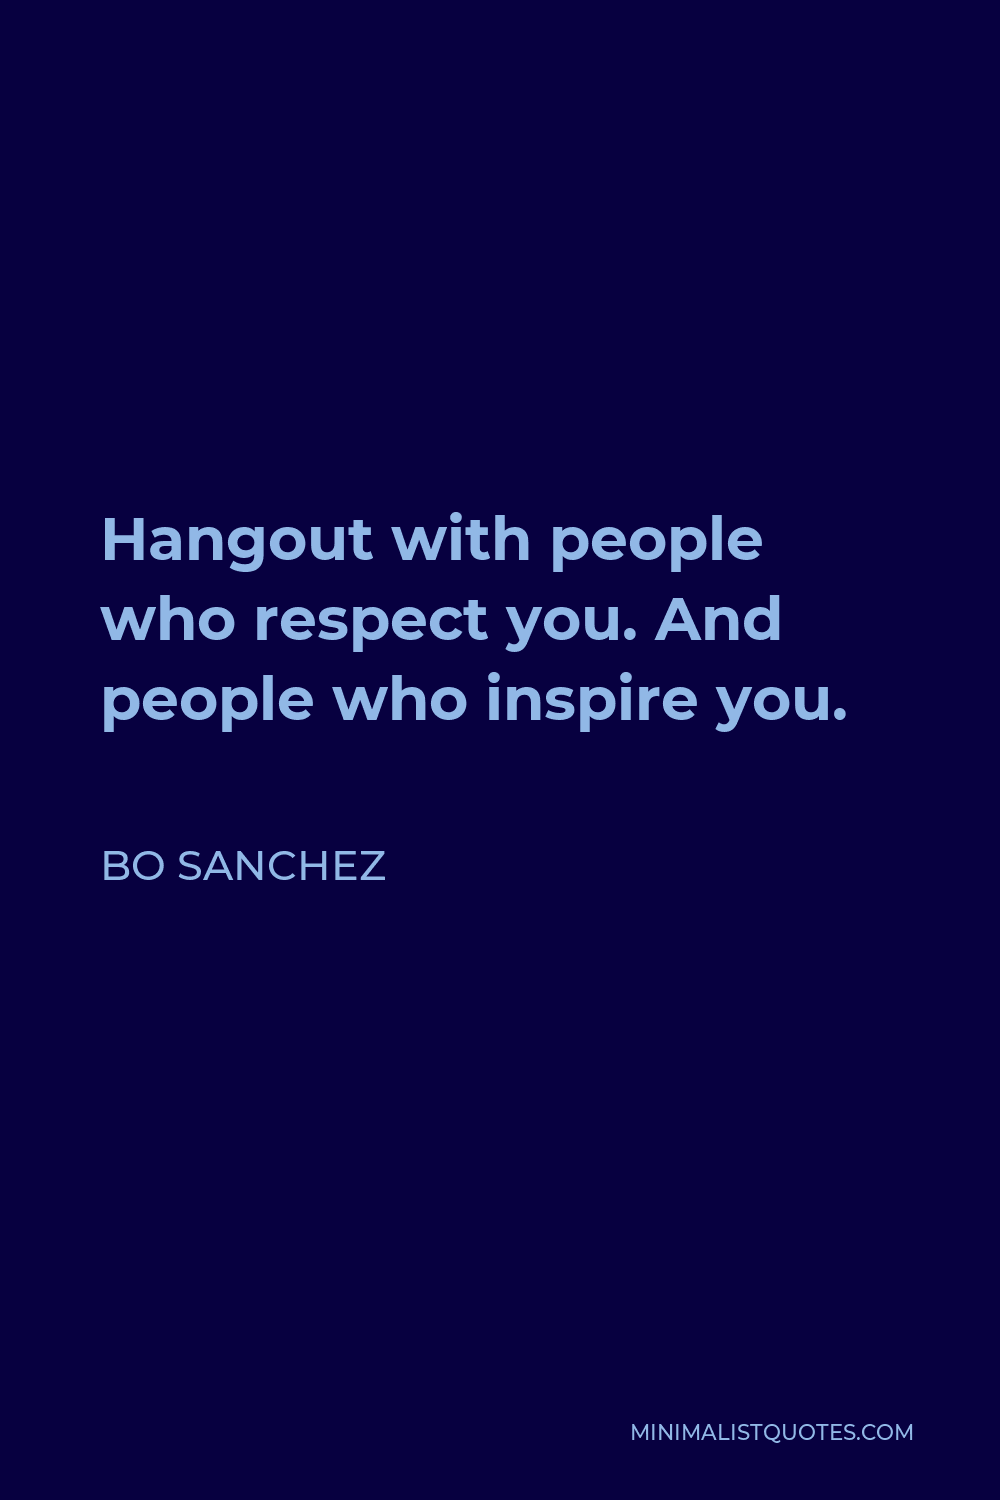 Bo Sanchez Quote - Hangout with people who respect you. And people who inspire you.